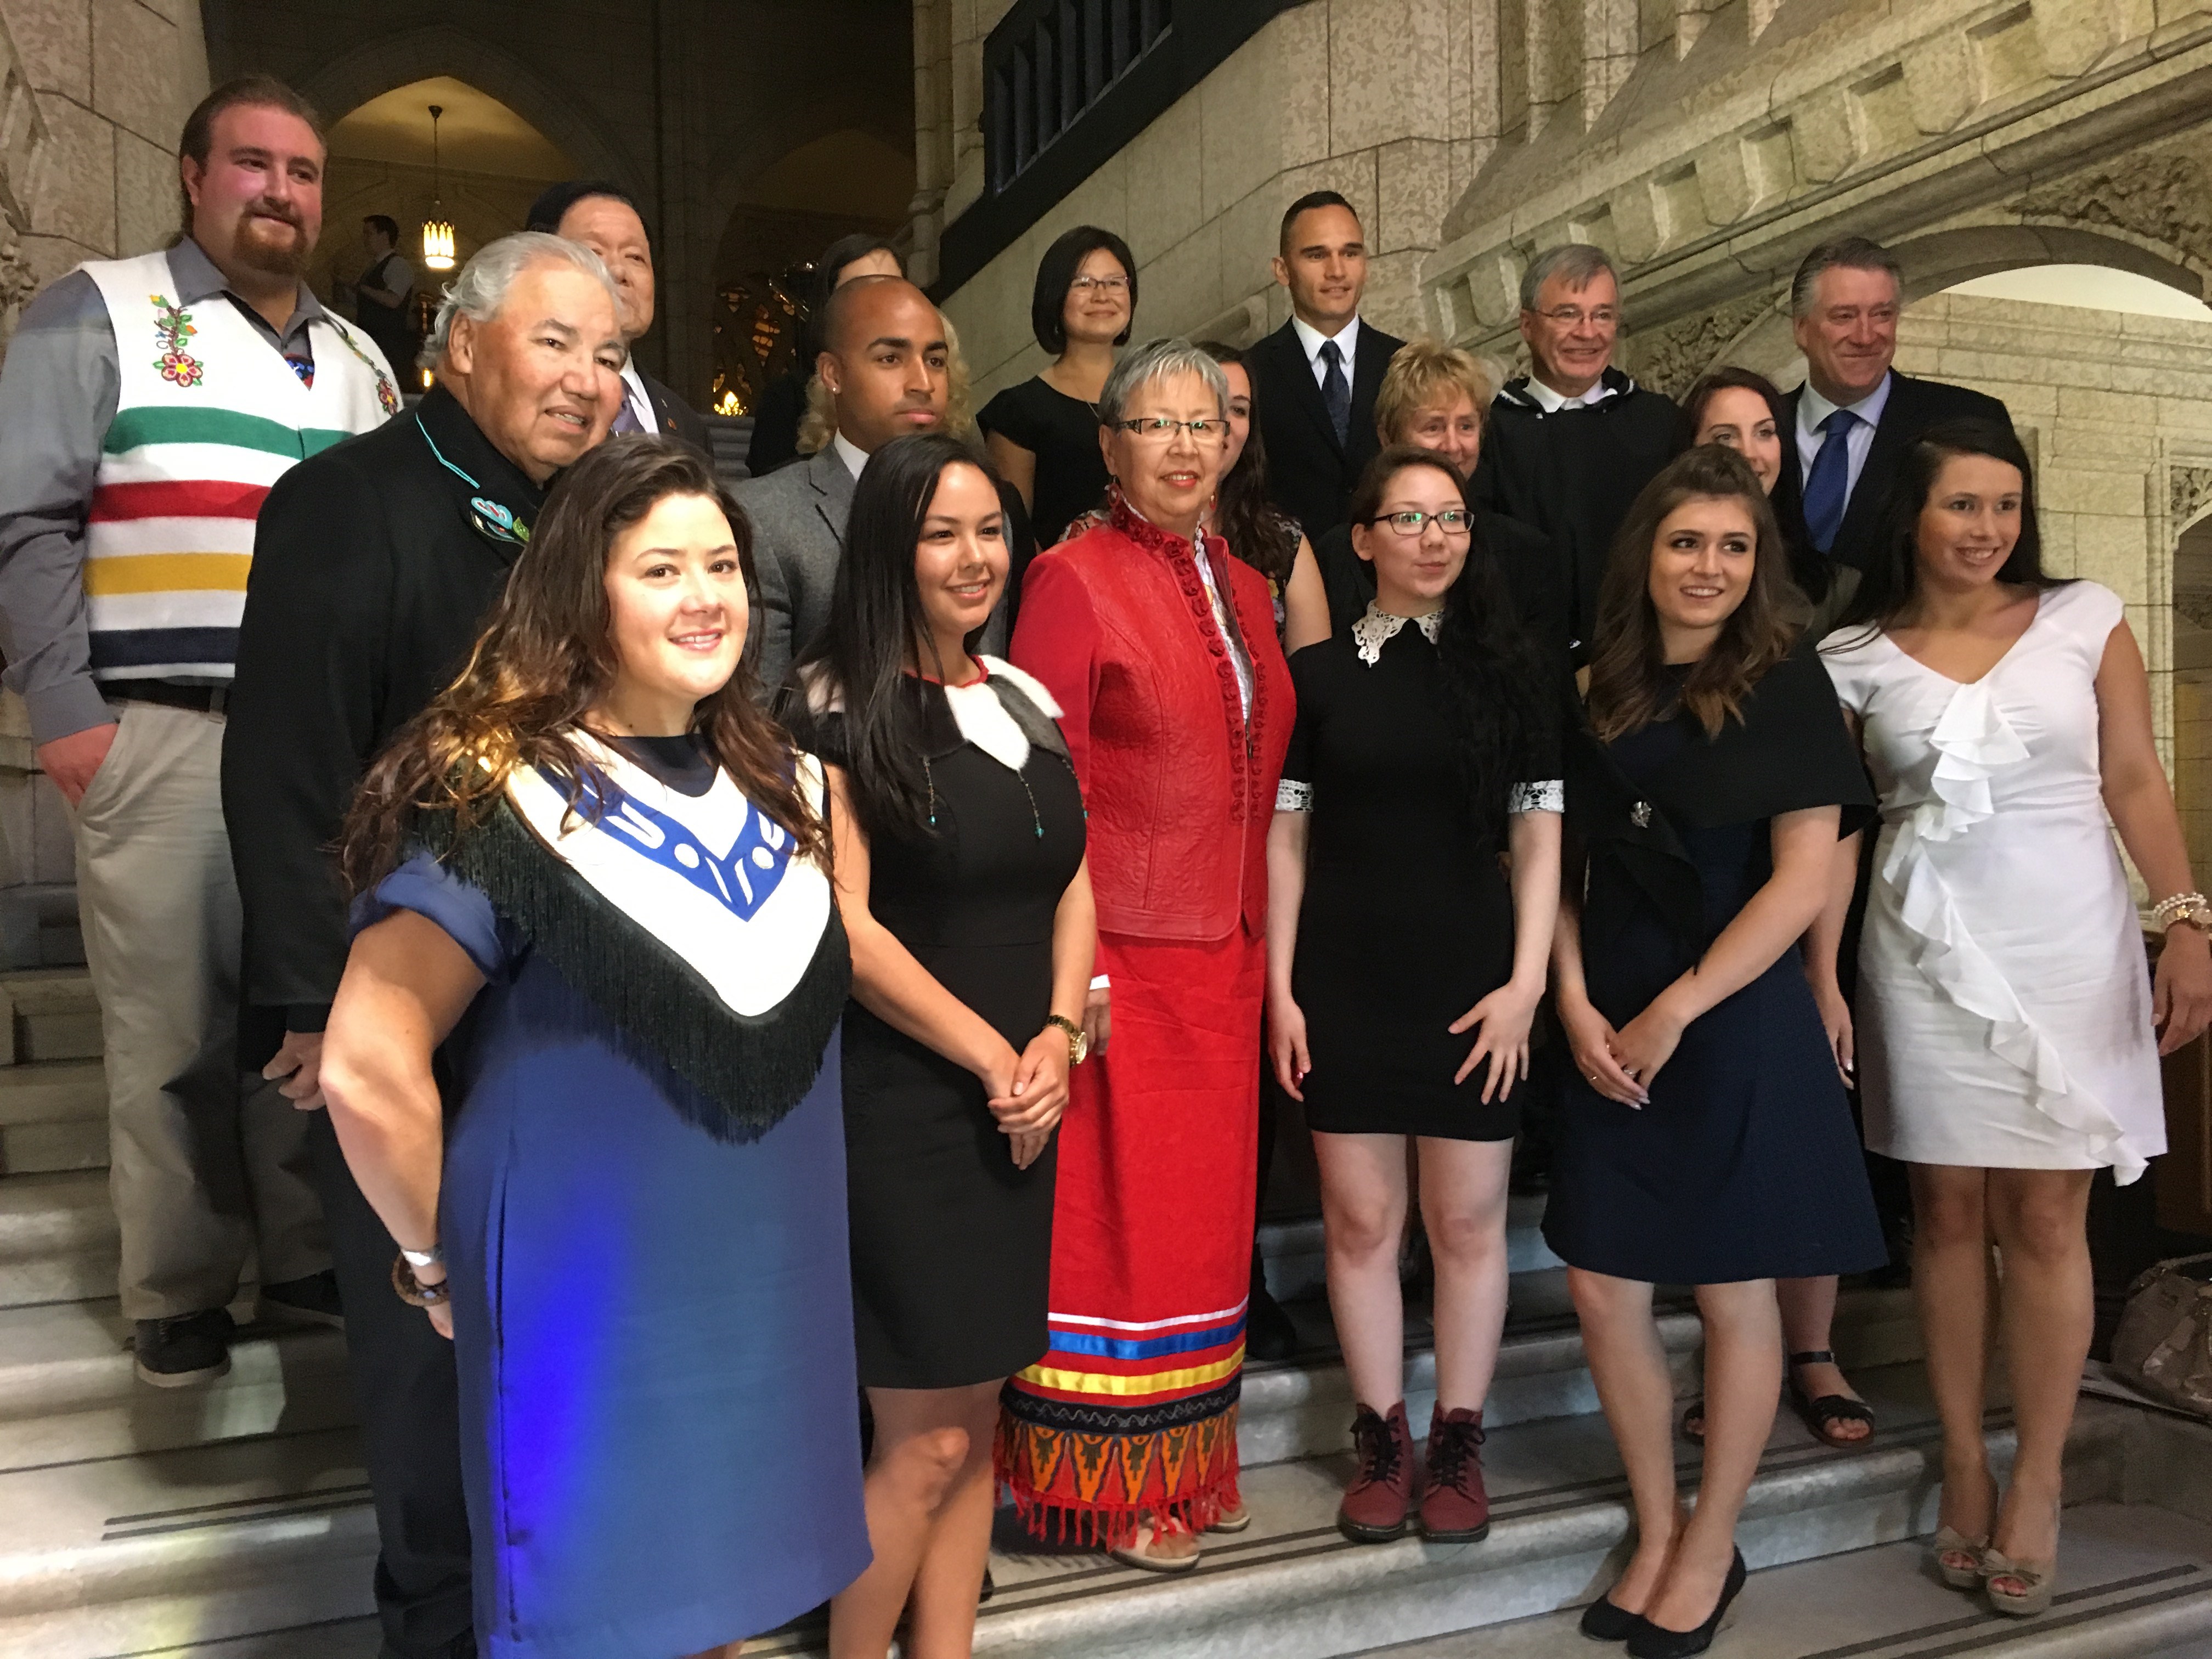 Senator Dyck and other members of the Senate Committee on Aboriginal Peoples meet with Youth Indigenize the Senate participants in Centre Block during the inaugural event on June 21, 2016. Kluane Adamek, of the Kluane First Nation in Yukon Territory, is on the far left.